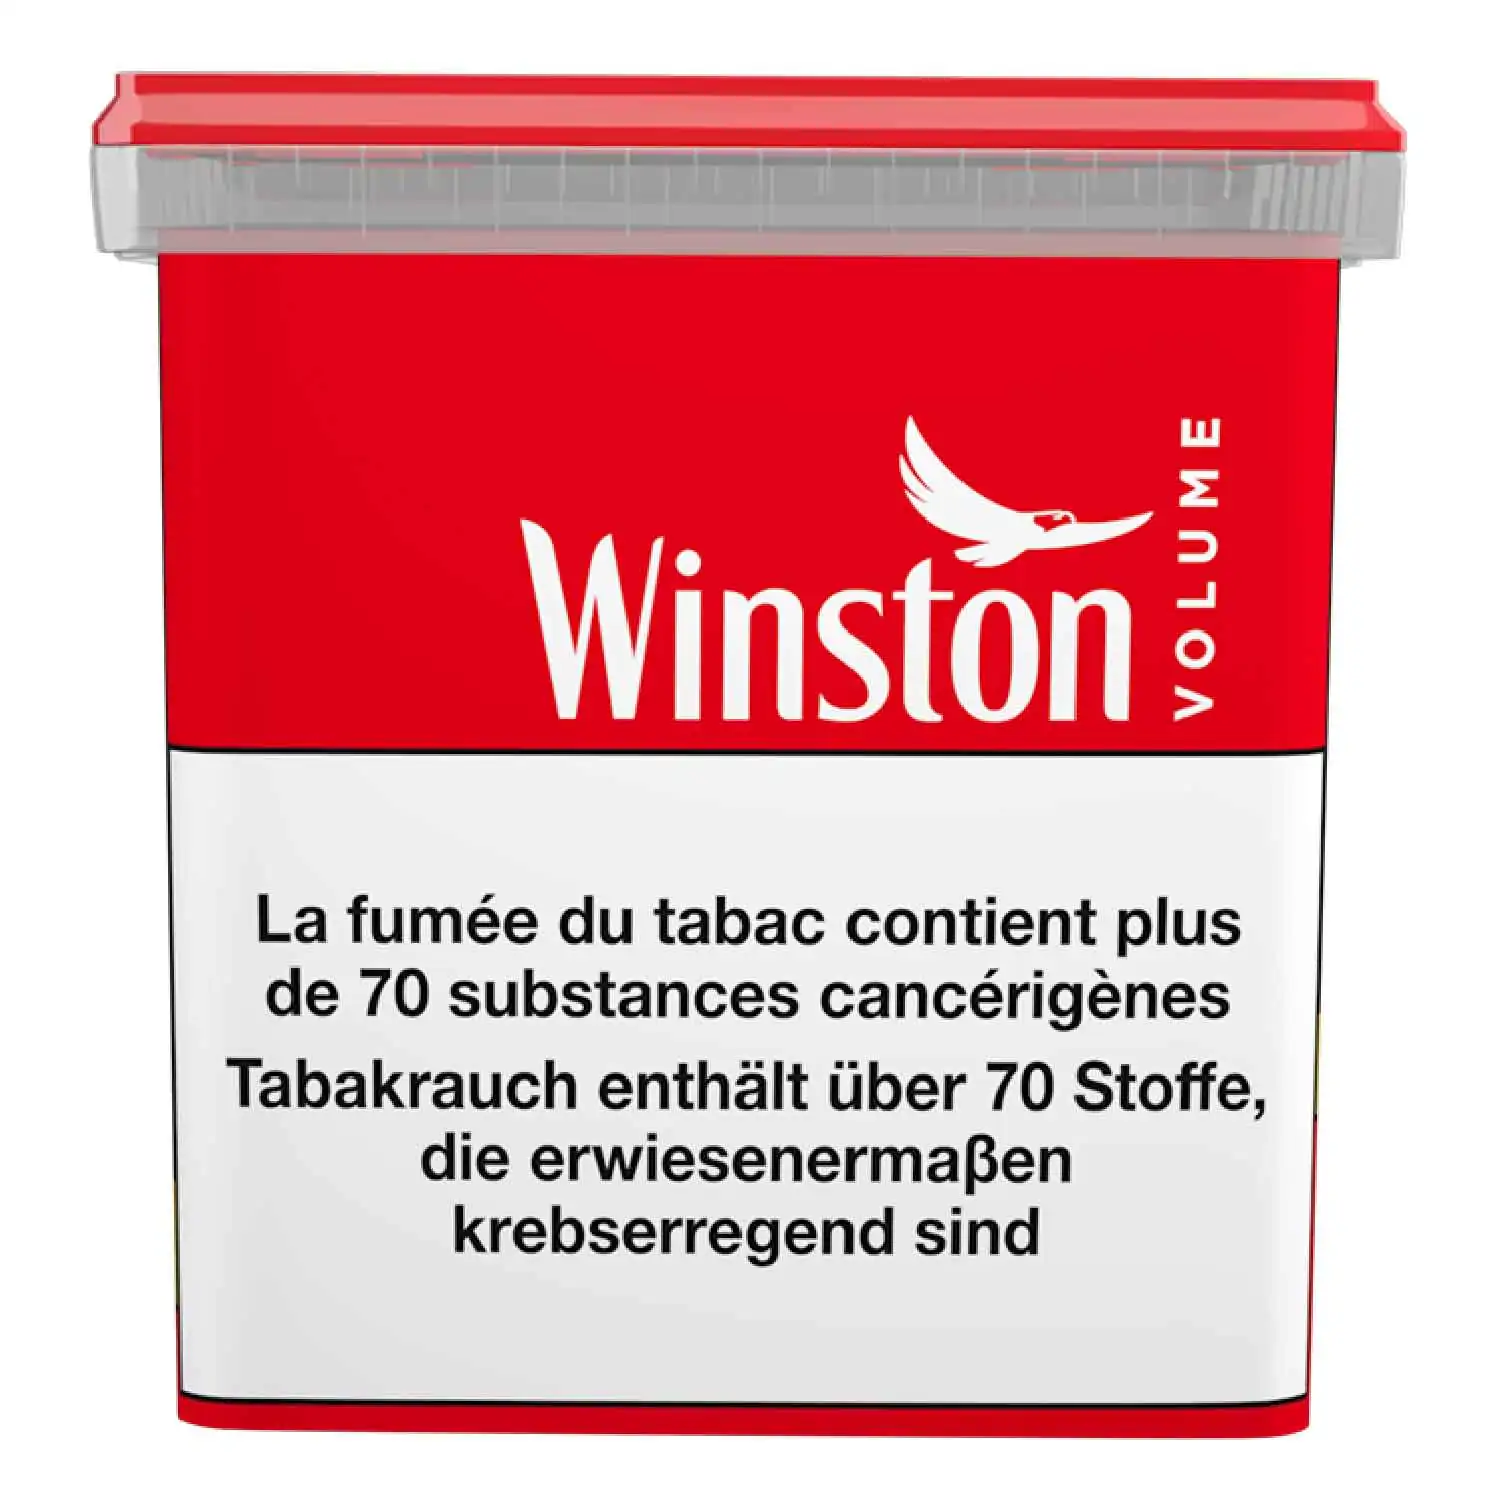 Winston volume red 250g - Buy at Real Tobacco